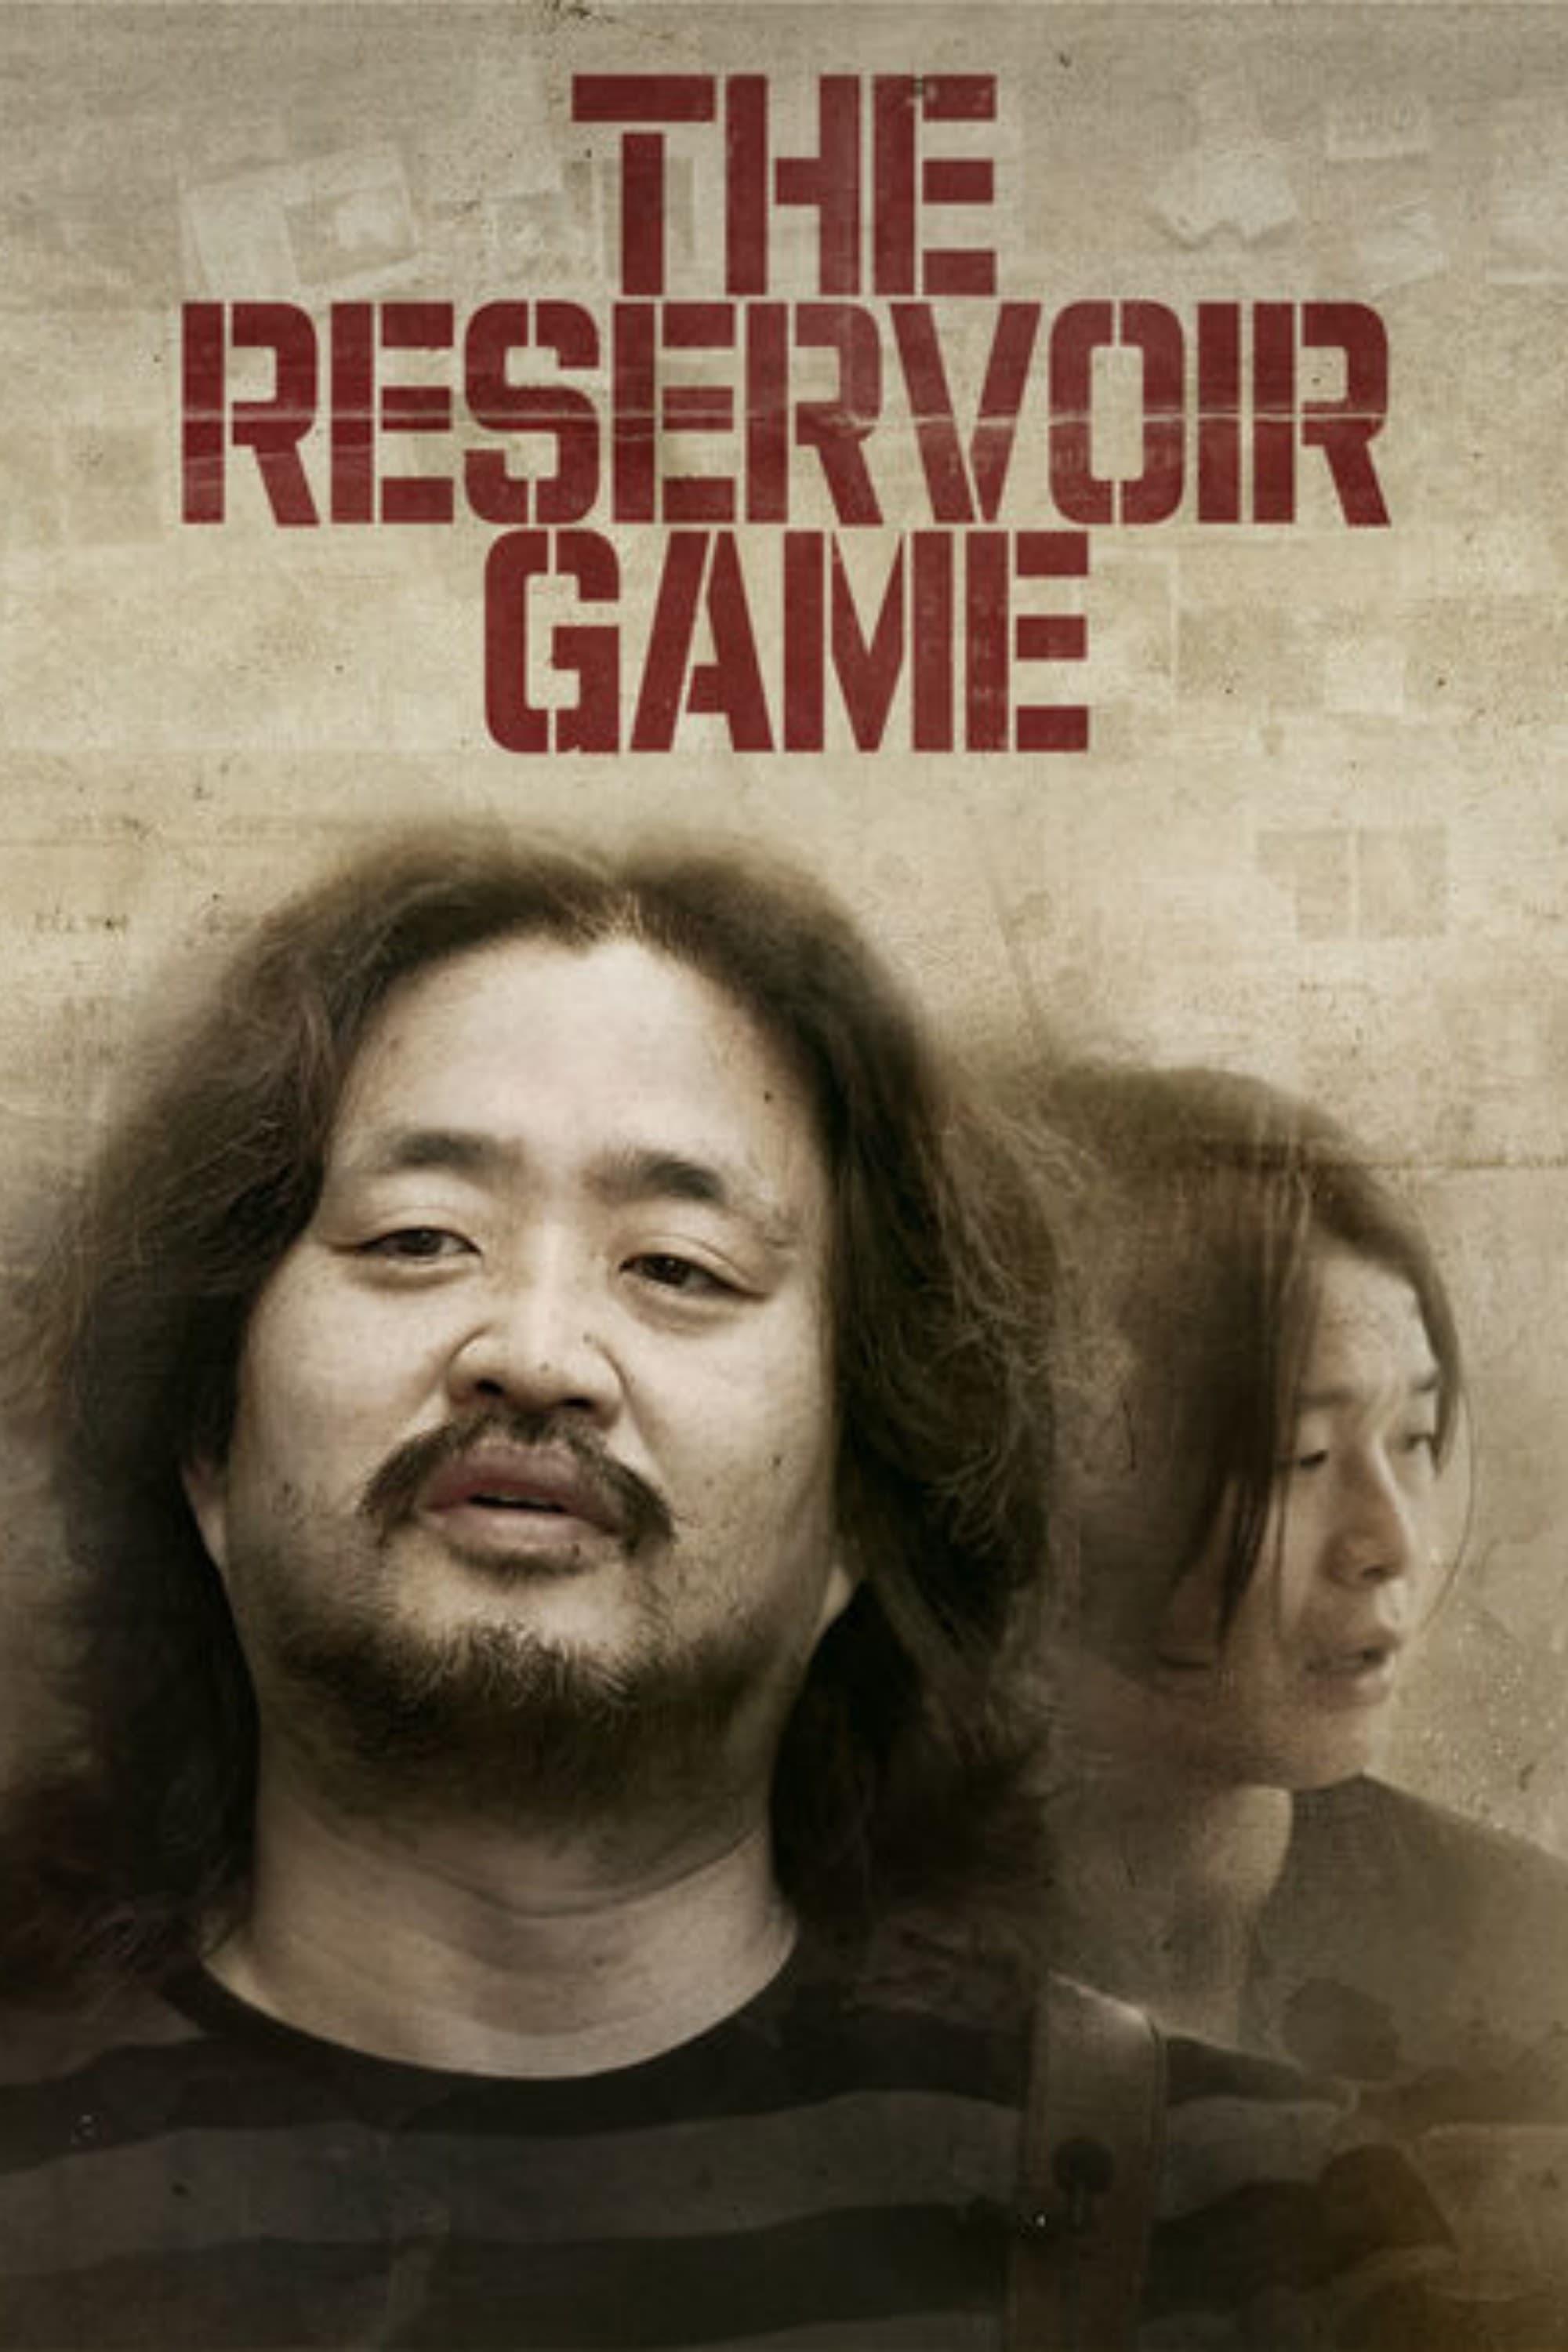 The Reservoir Game poster